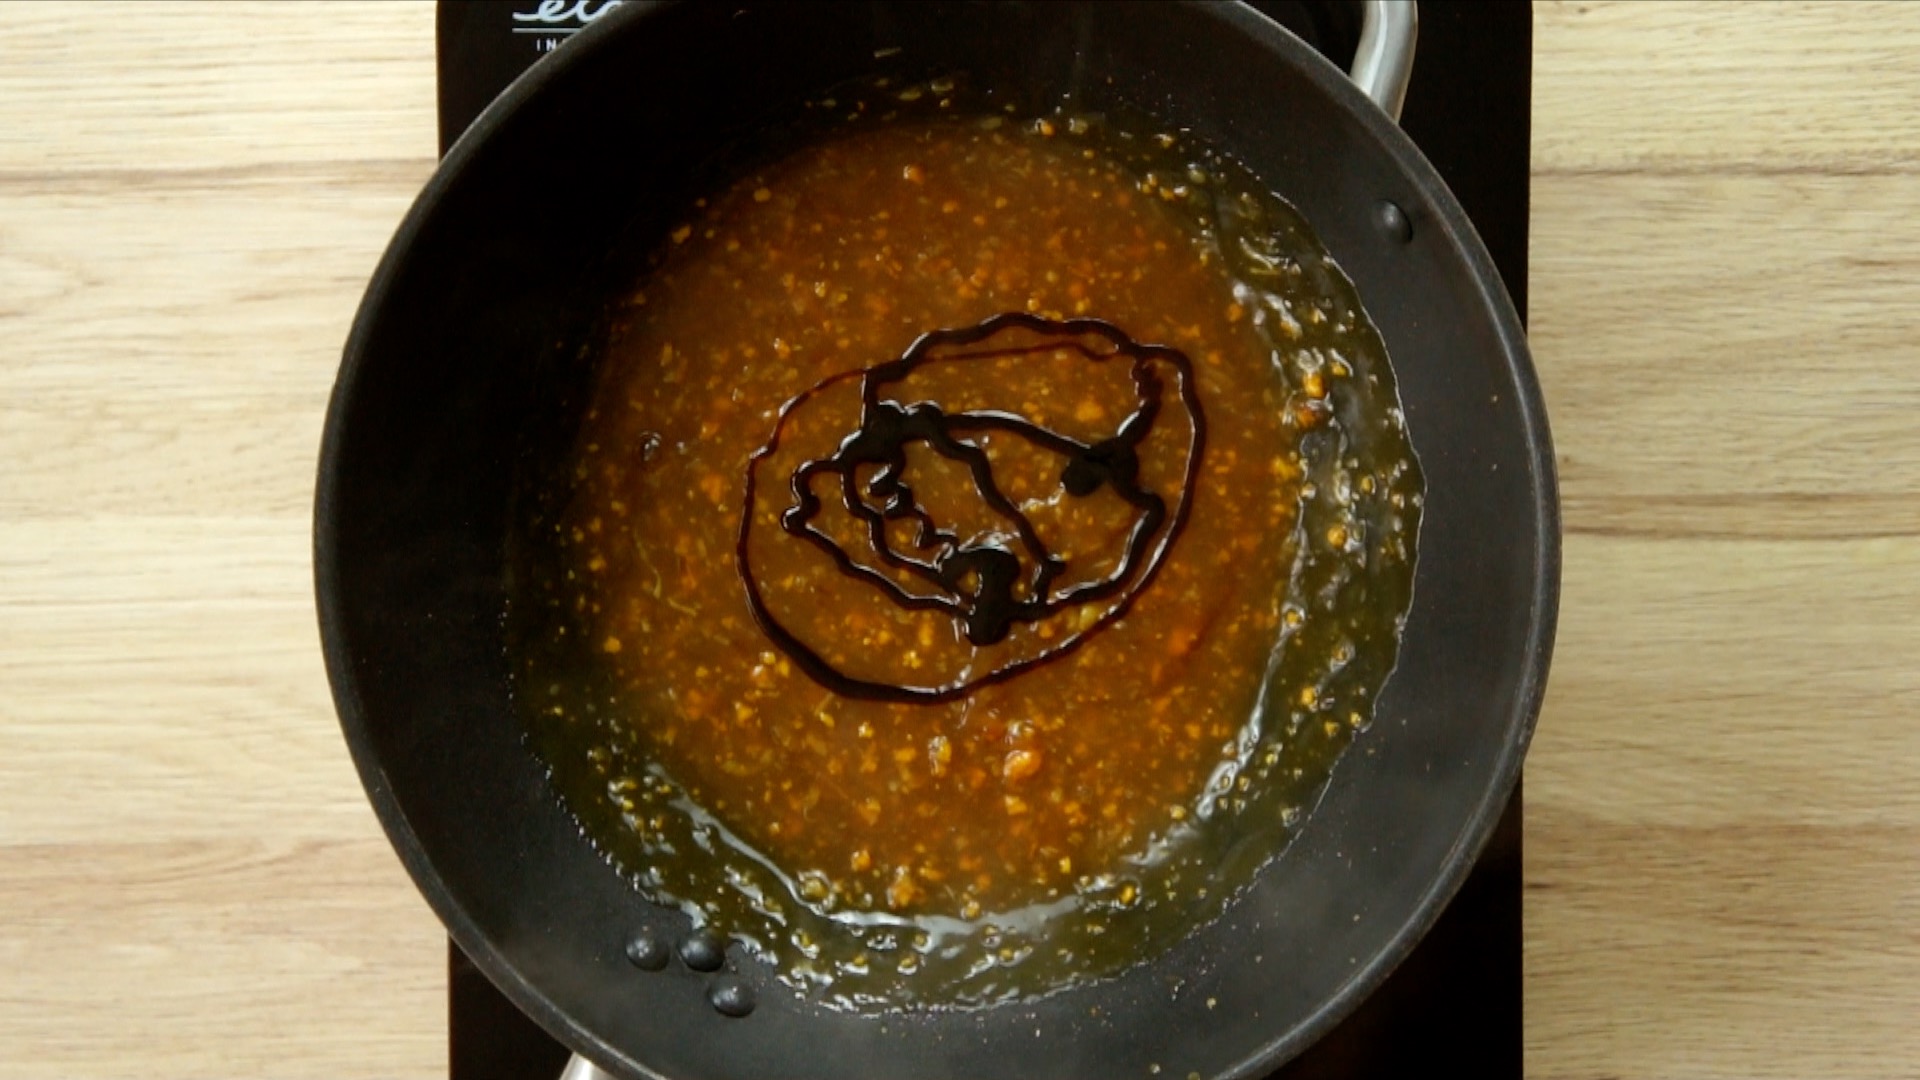 Dark brown sauce with ginger and garlic pieces and a drizzle of black paste in a wok.